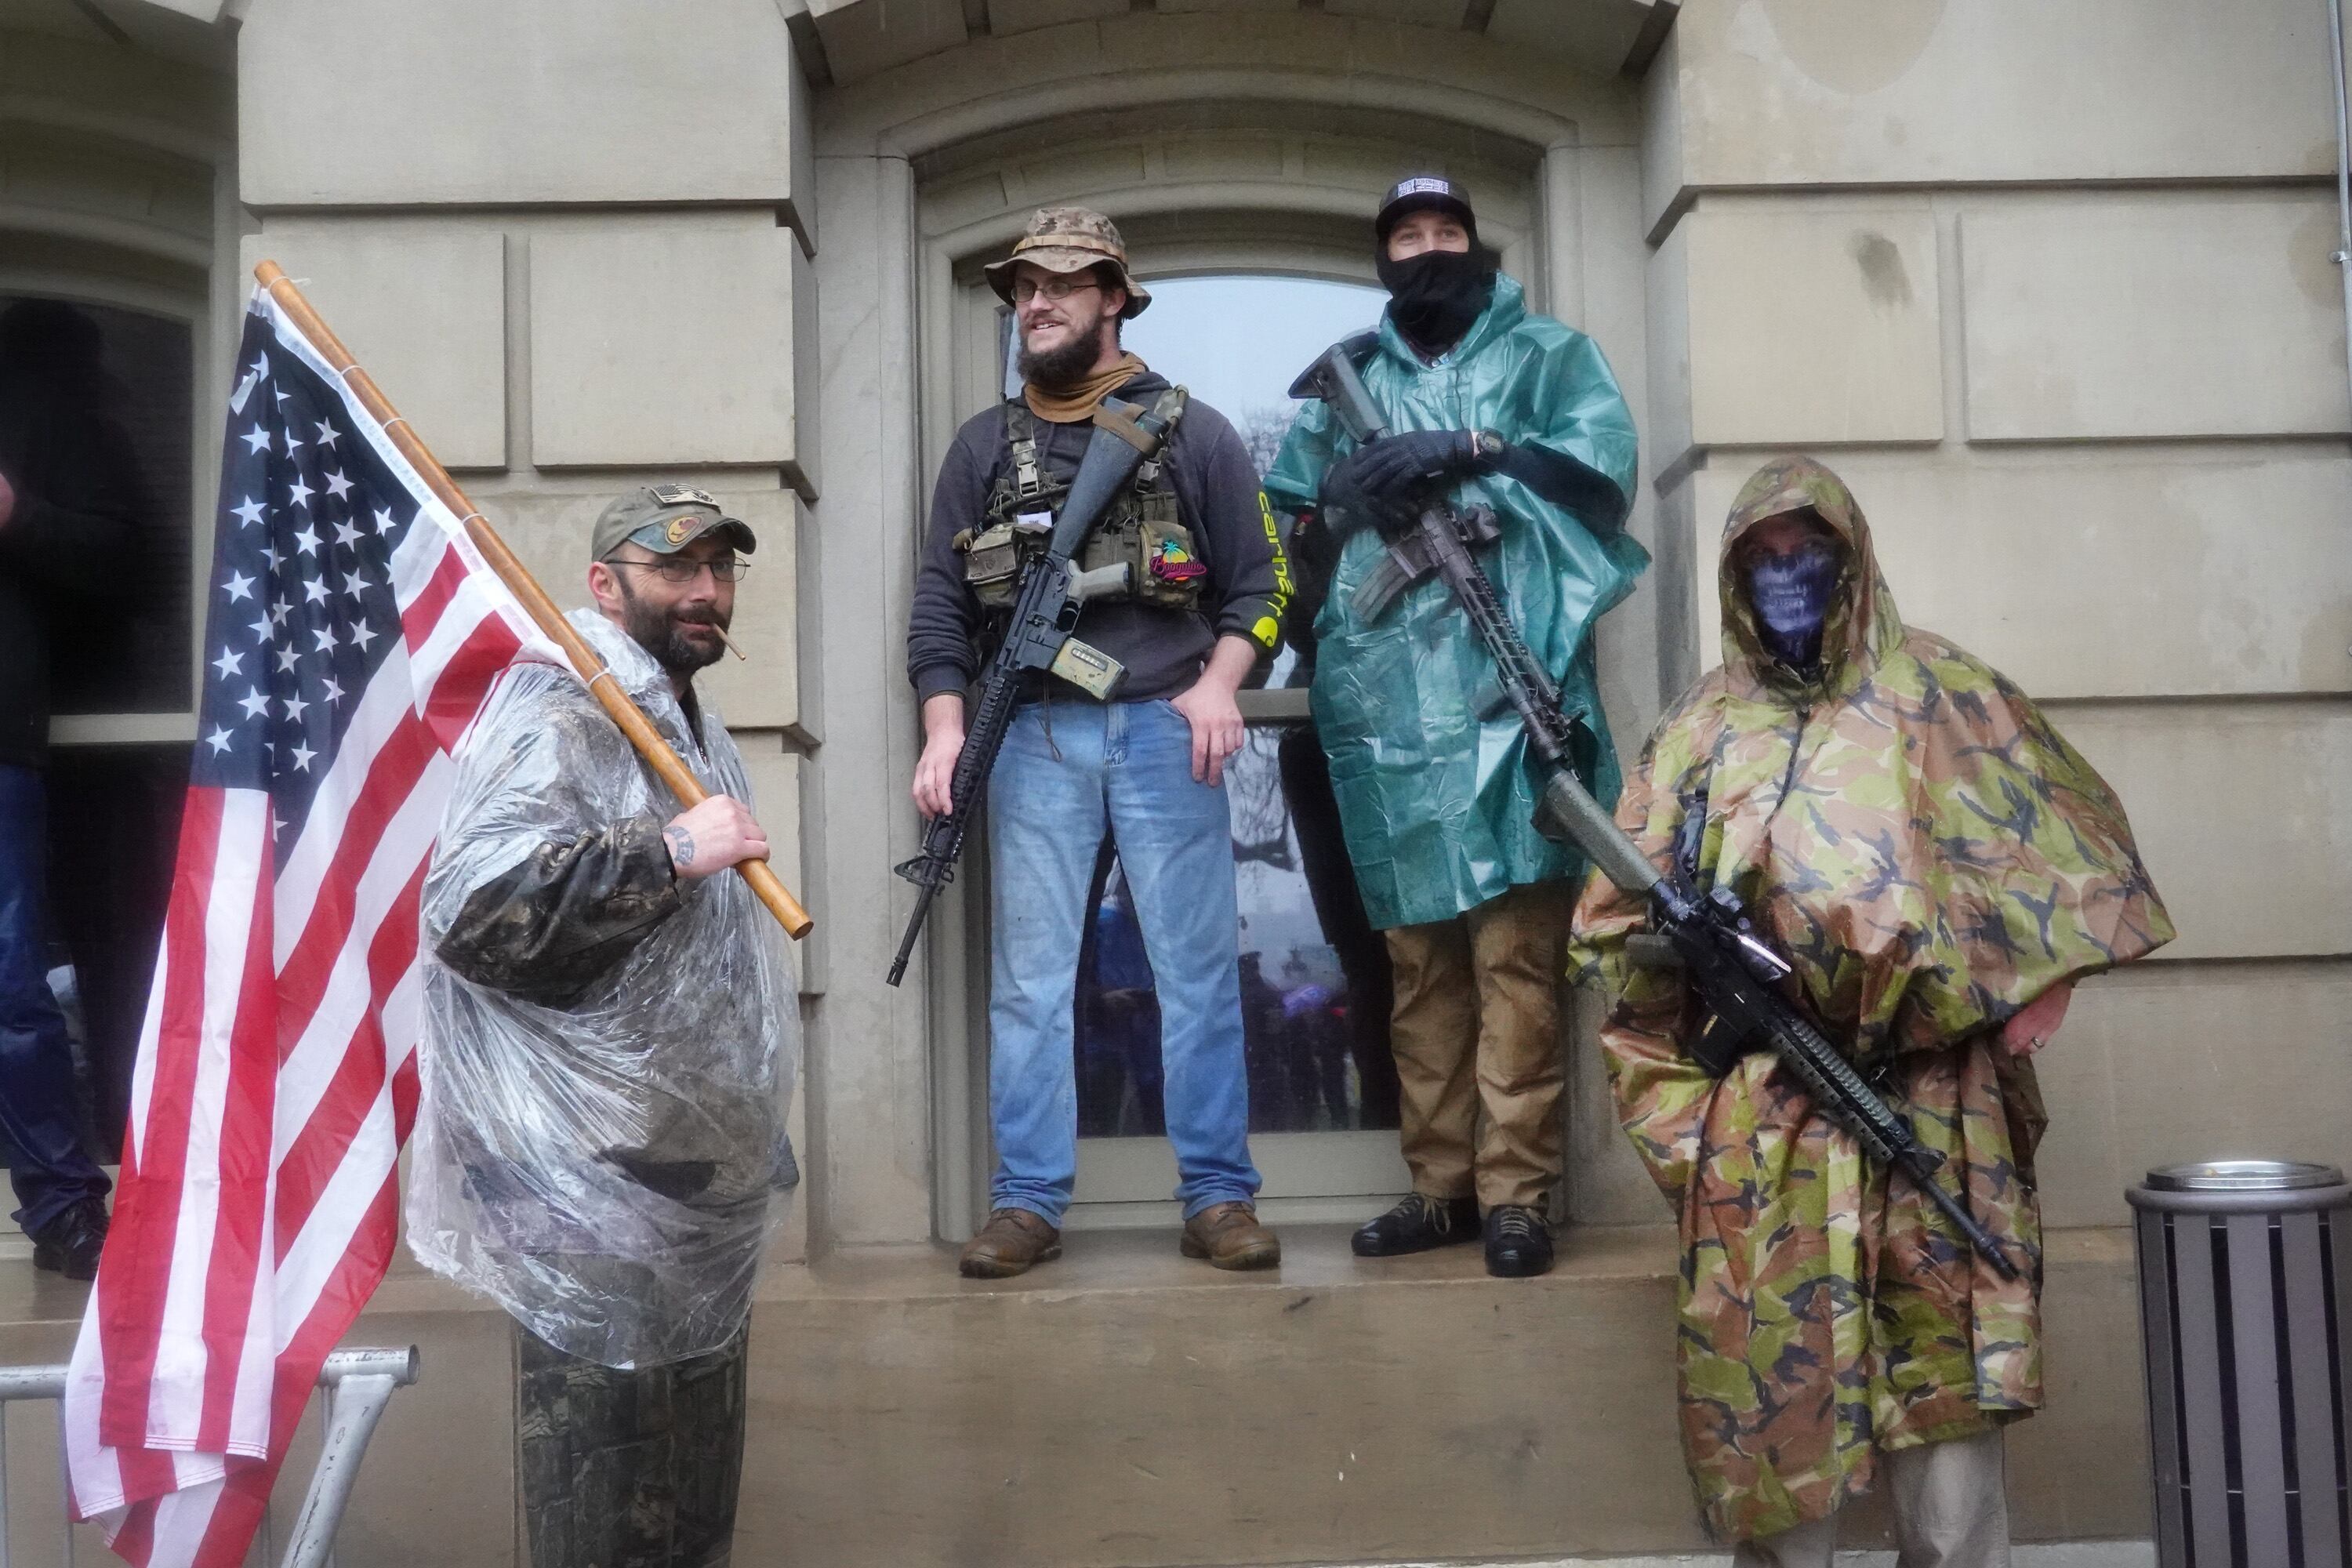 Armed protesters protest against measures to prevent Covid-19 infections in Michigan, in May 2020.